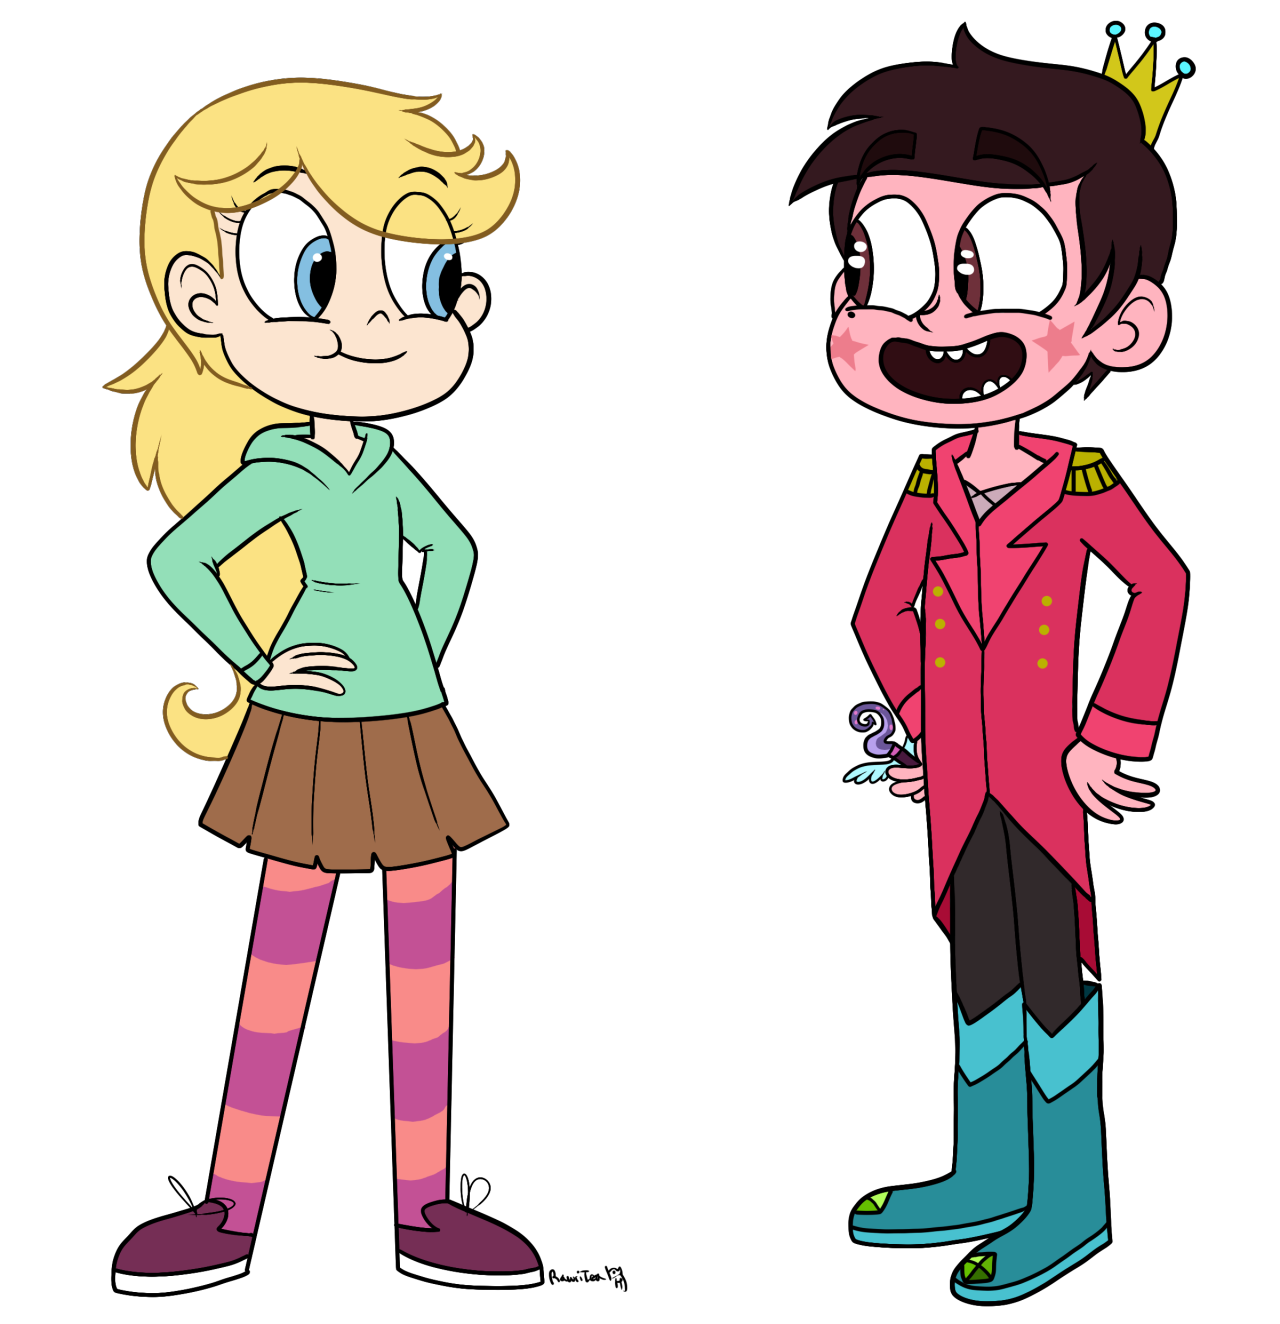 Star and Marco's Super Awesome Na- I mean Blog.